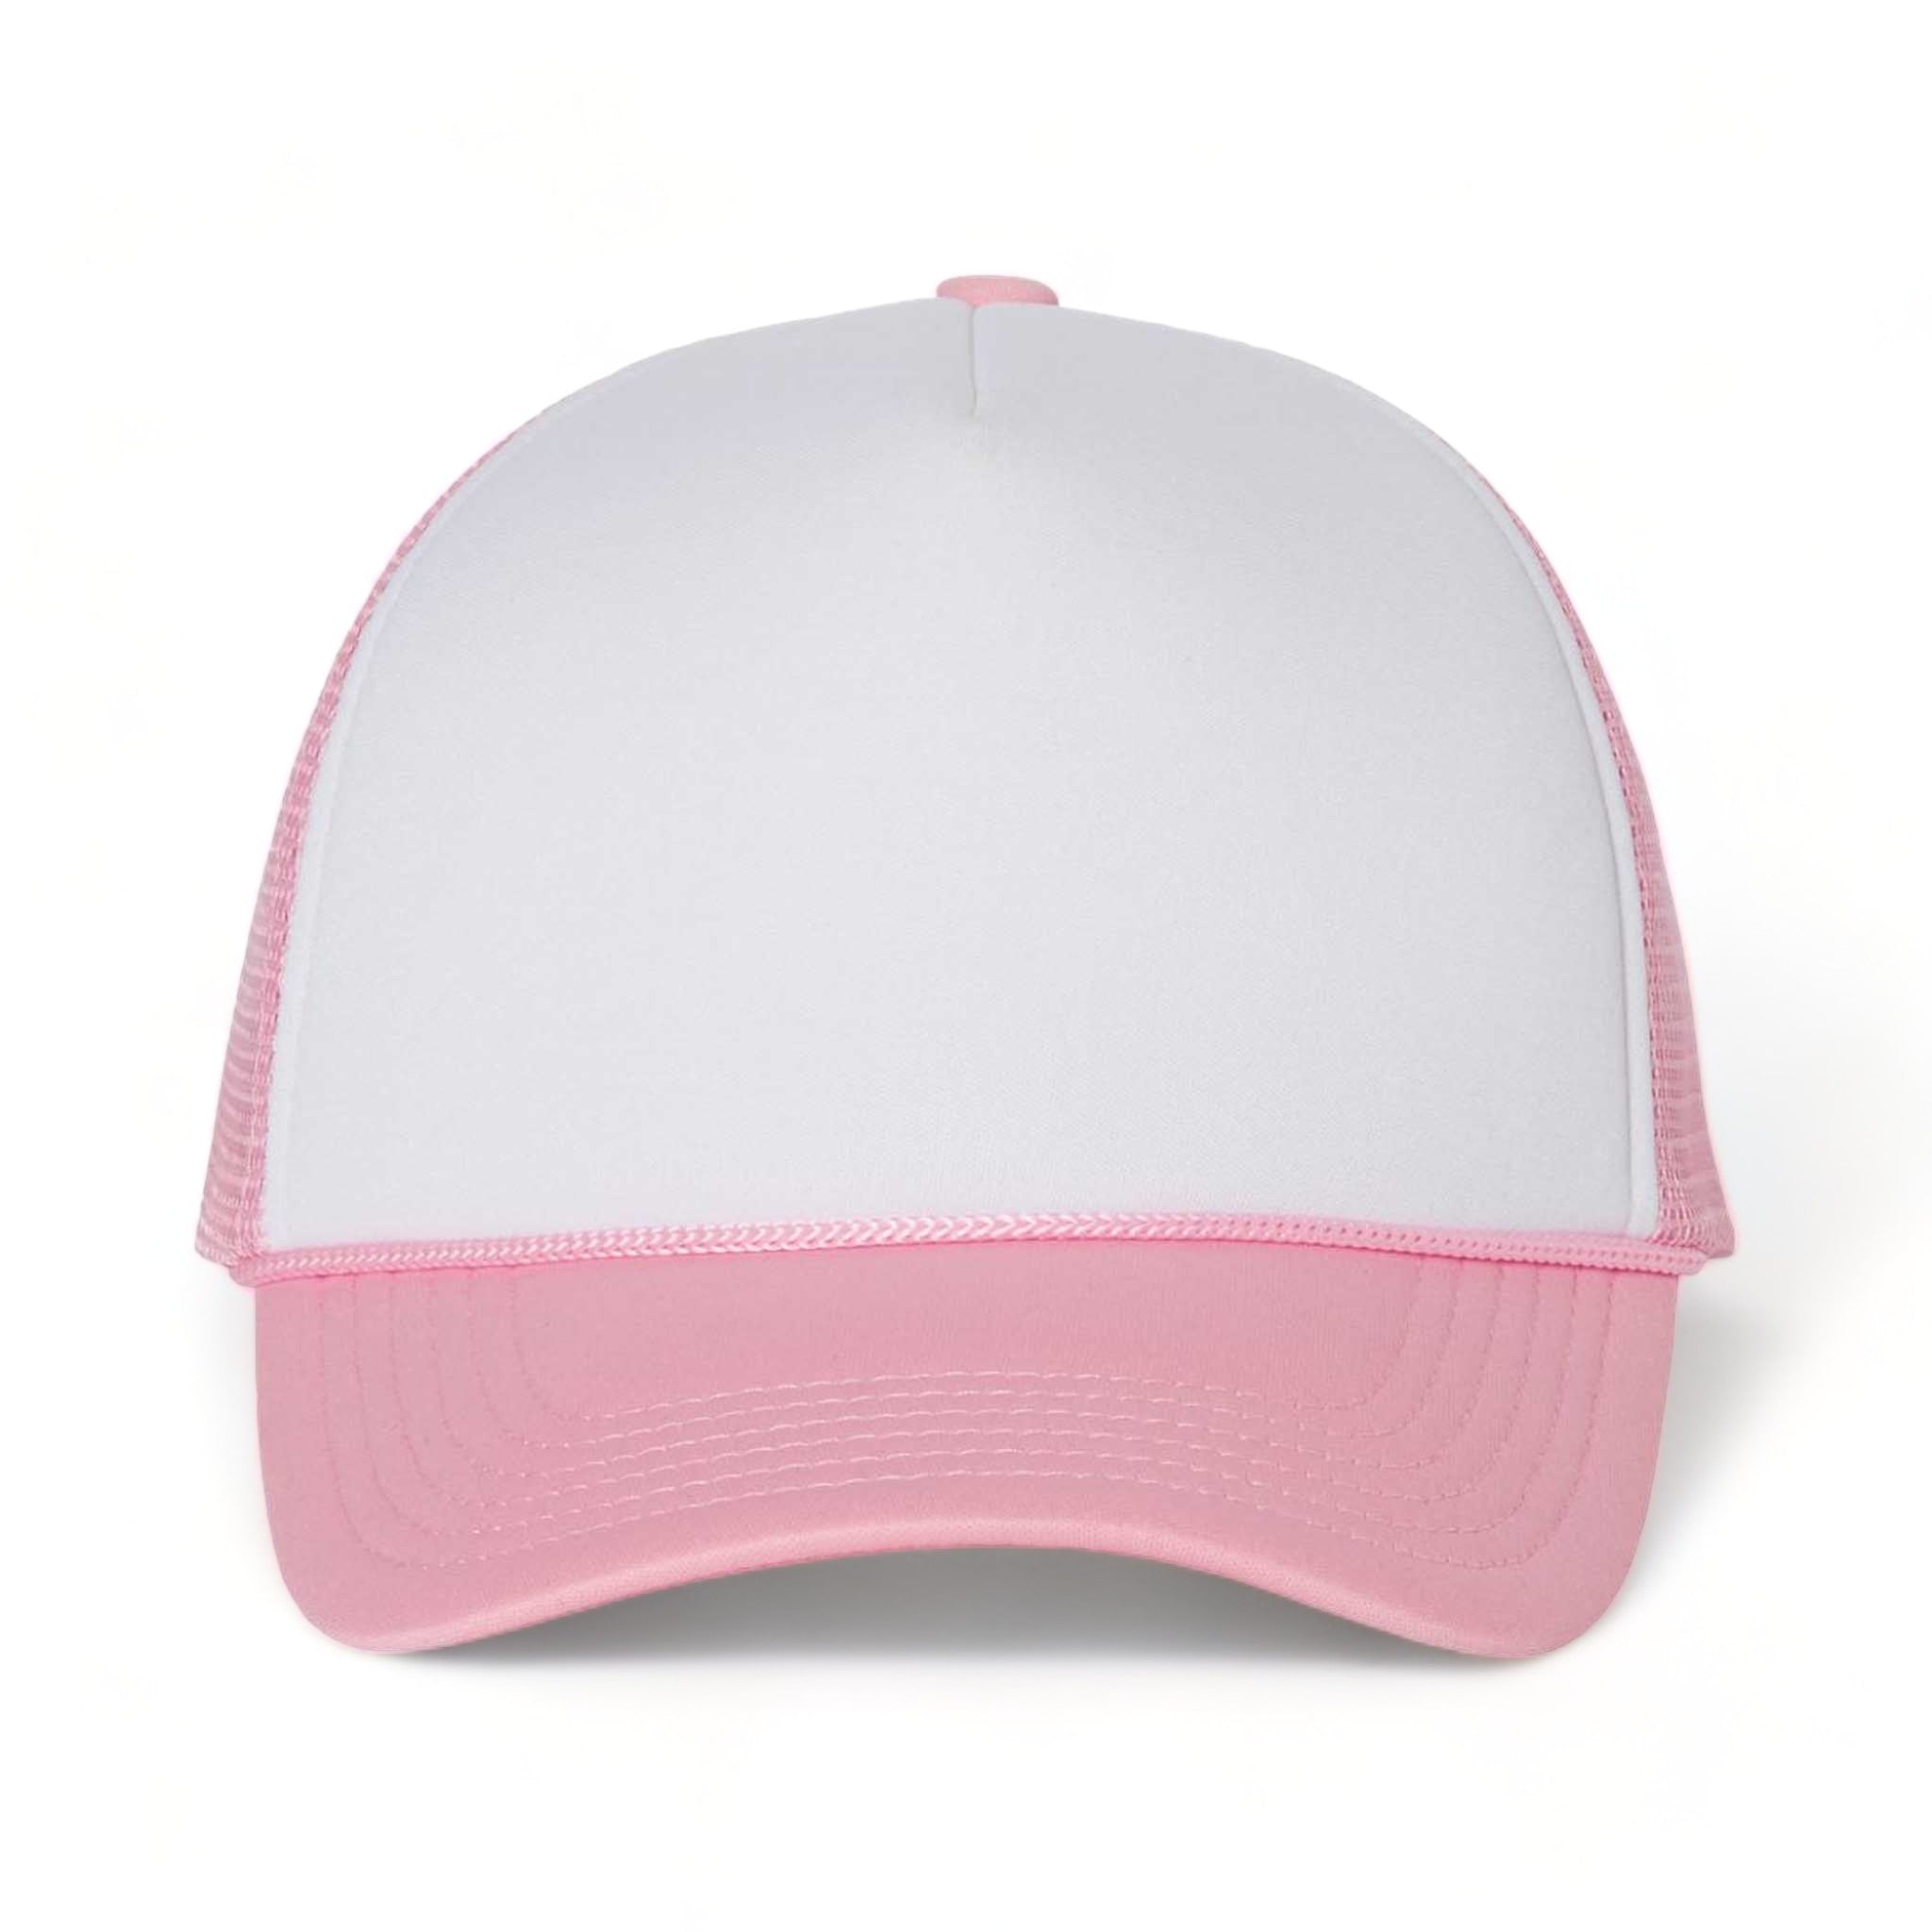 Front view of Valucap VC700 custom hat in white and pink